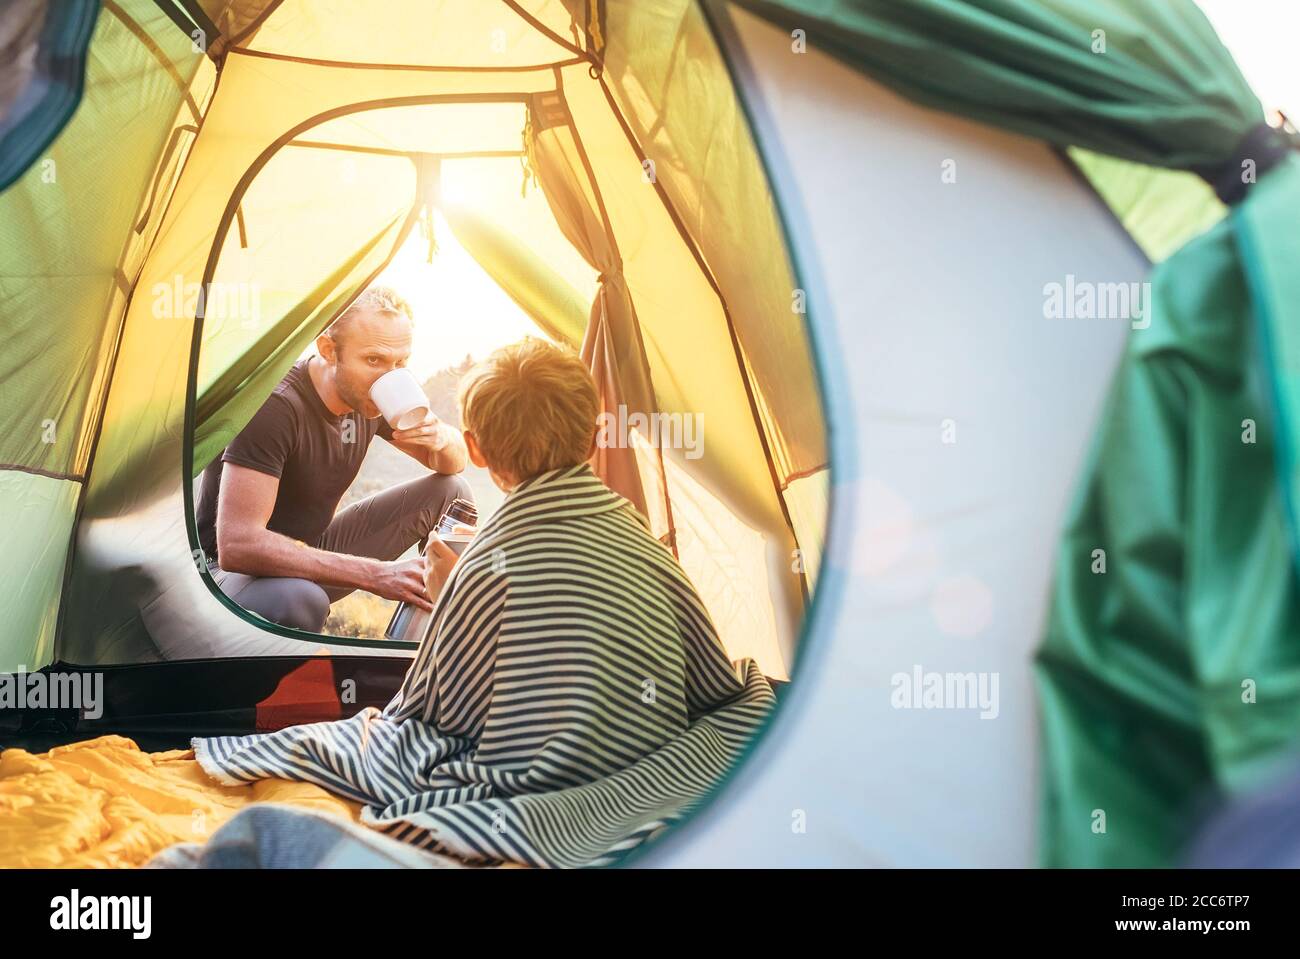 Family lisure concept image. Father and son prepare for camping in mountain, drink tea in ten Stock Photo